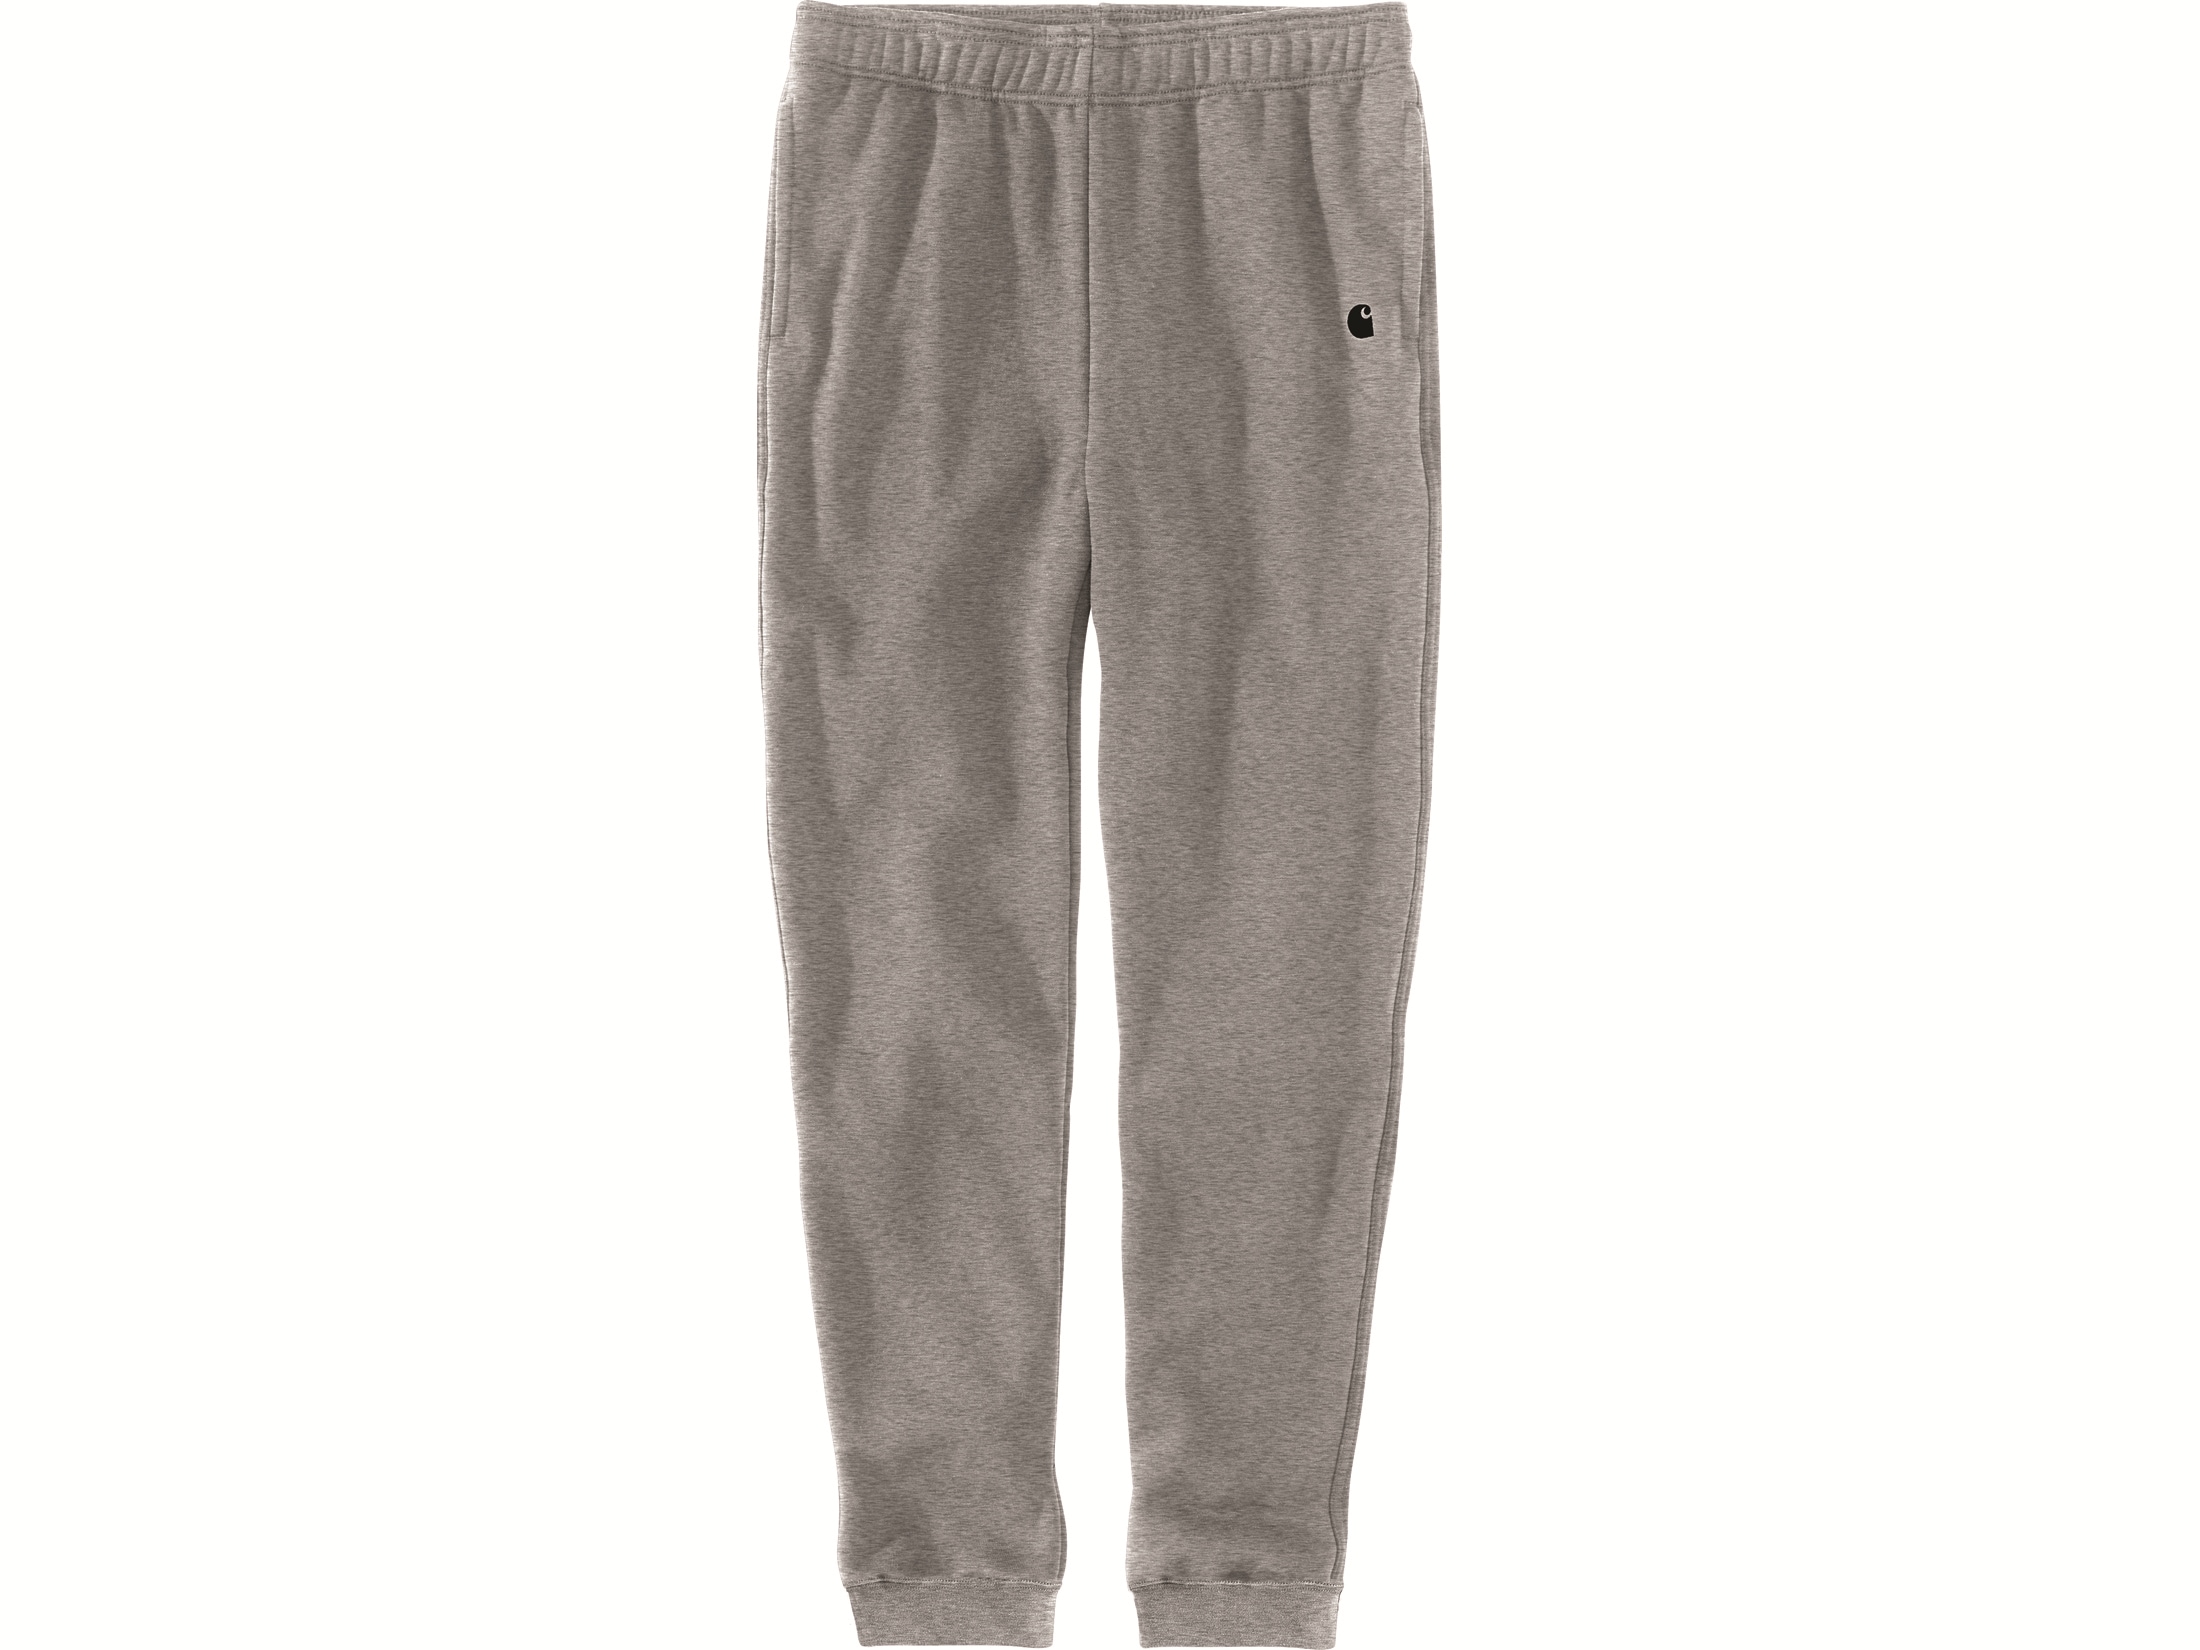 Carhartt Men's Relaxed Fit Midweight Tapered Sweatpants Heather Gray